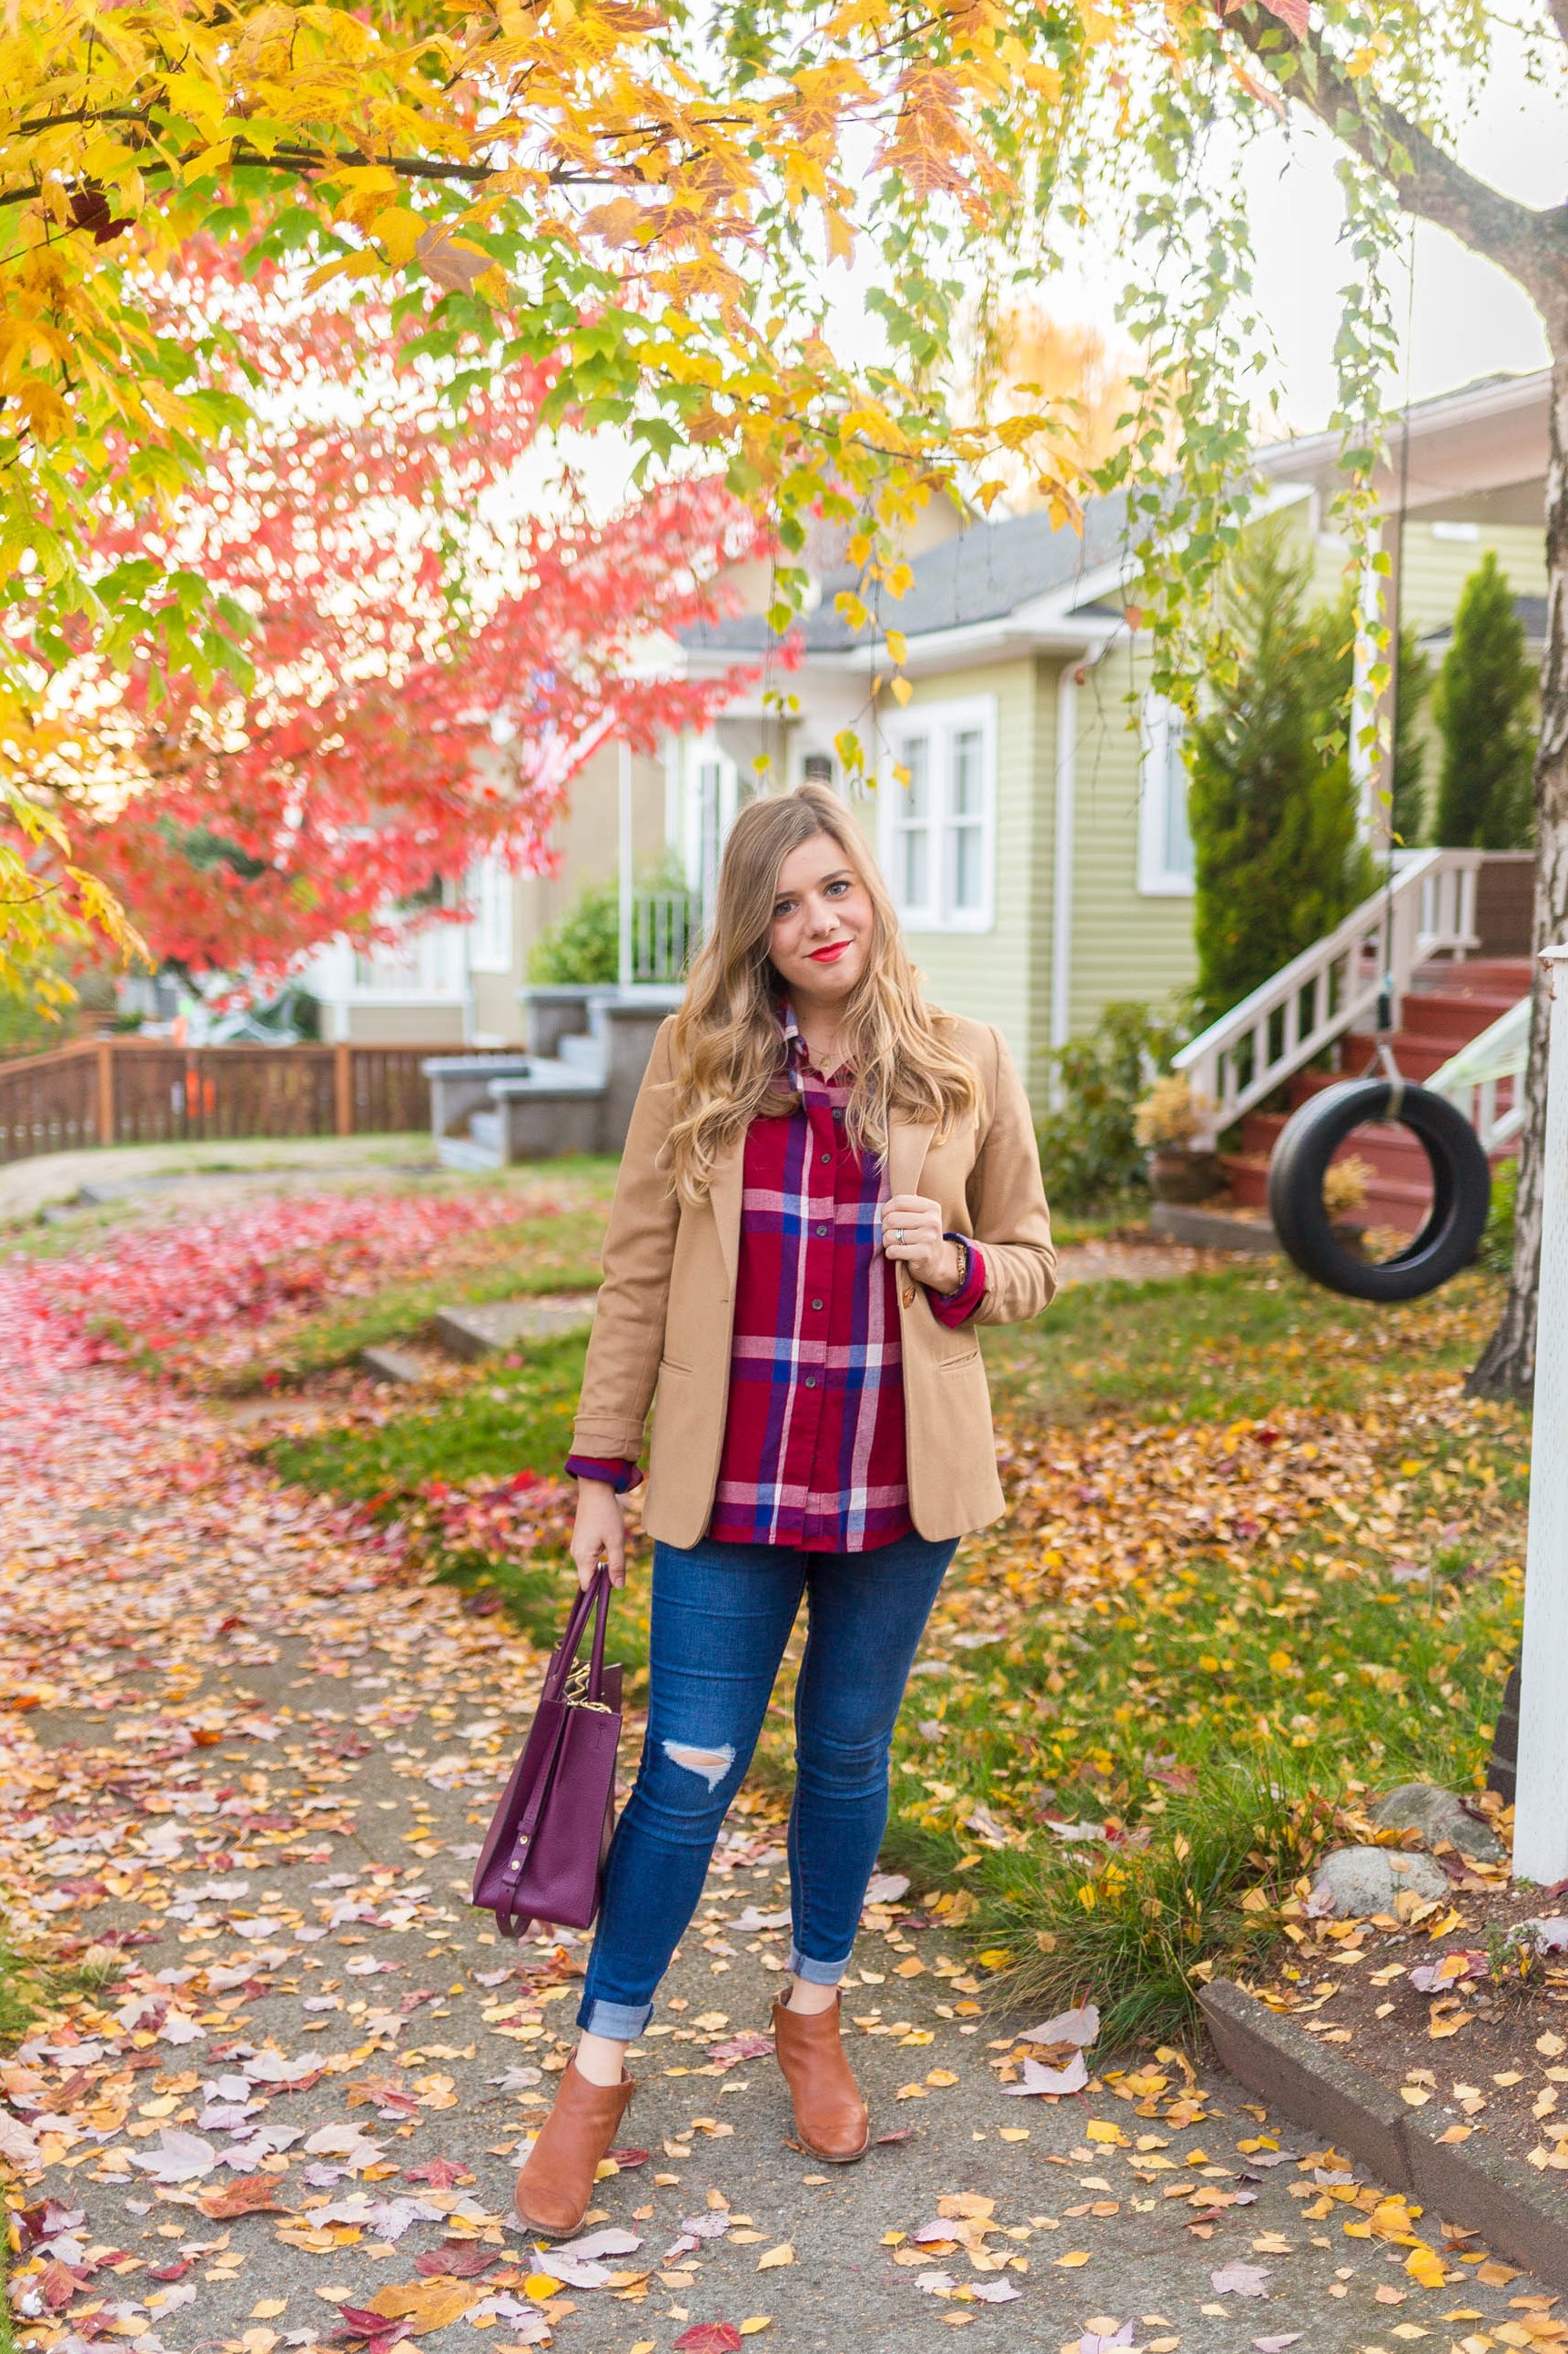 how to save money while shopping online - comfy maternity thanksgiving outfit - cute fall maternity outfit - Northwest Blonde - Seattle style blog